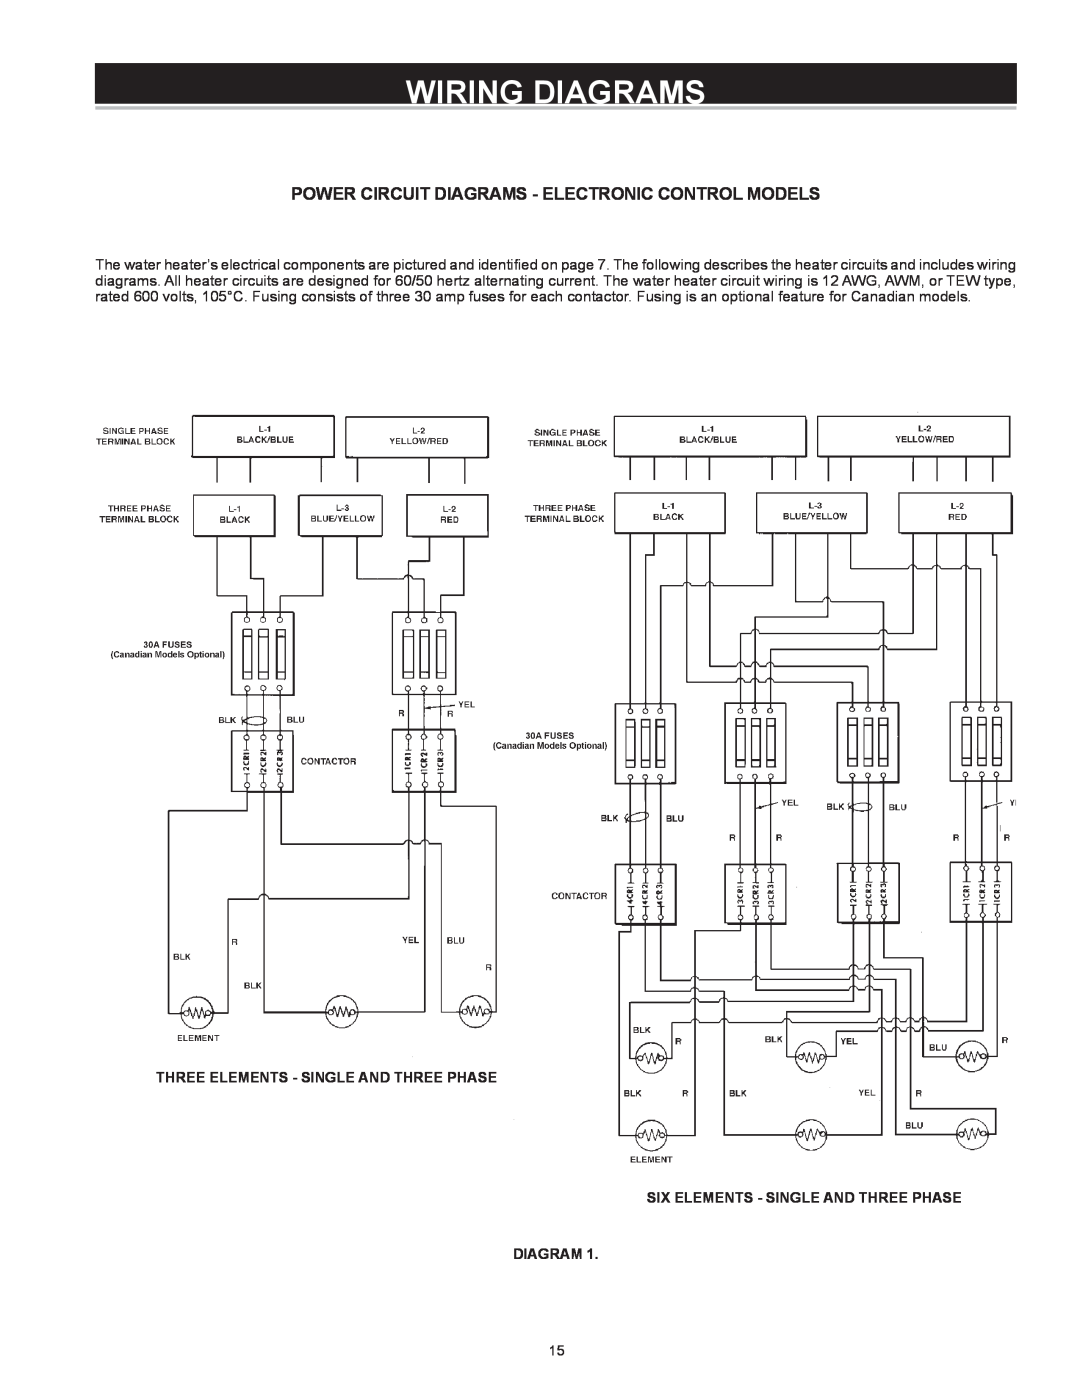 A.O. Smith Dve-52/80/120 Power Circuit Diagrams - Electronic Control Models, Three Elements - Single And Three Phase 